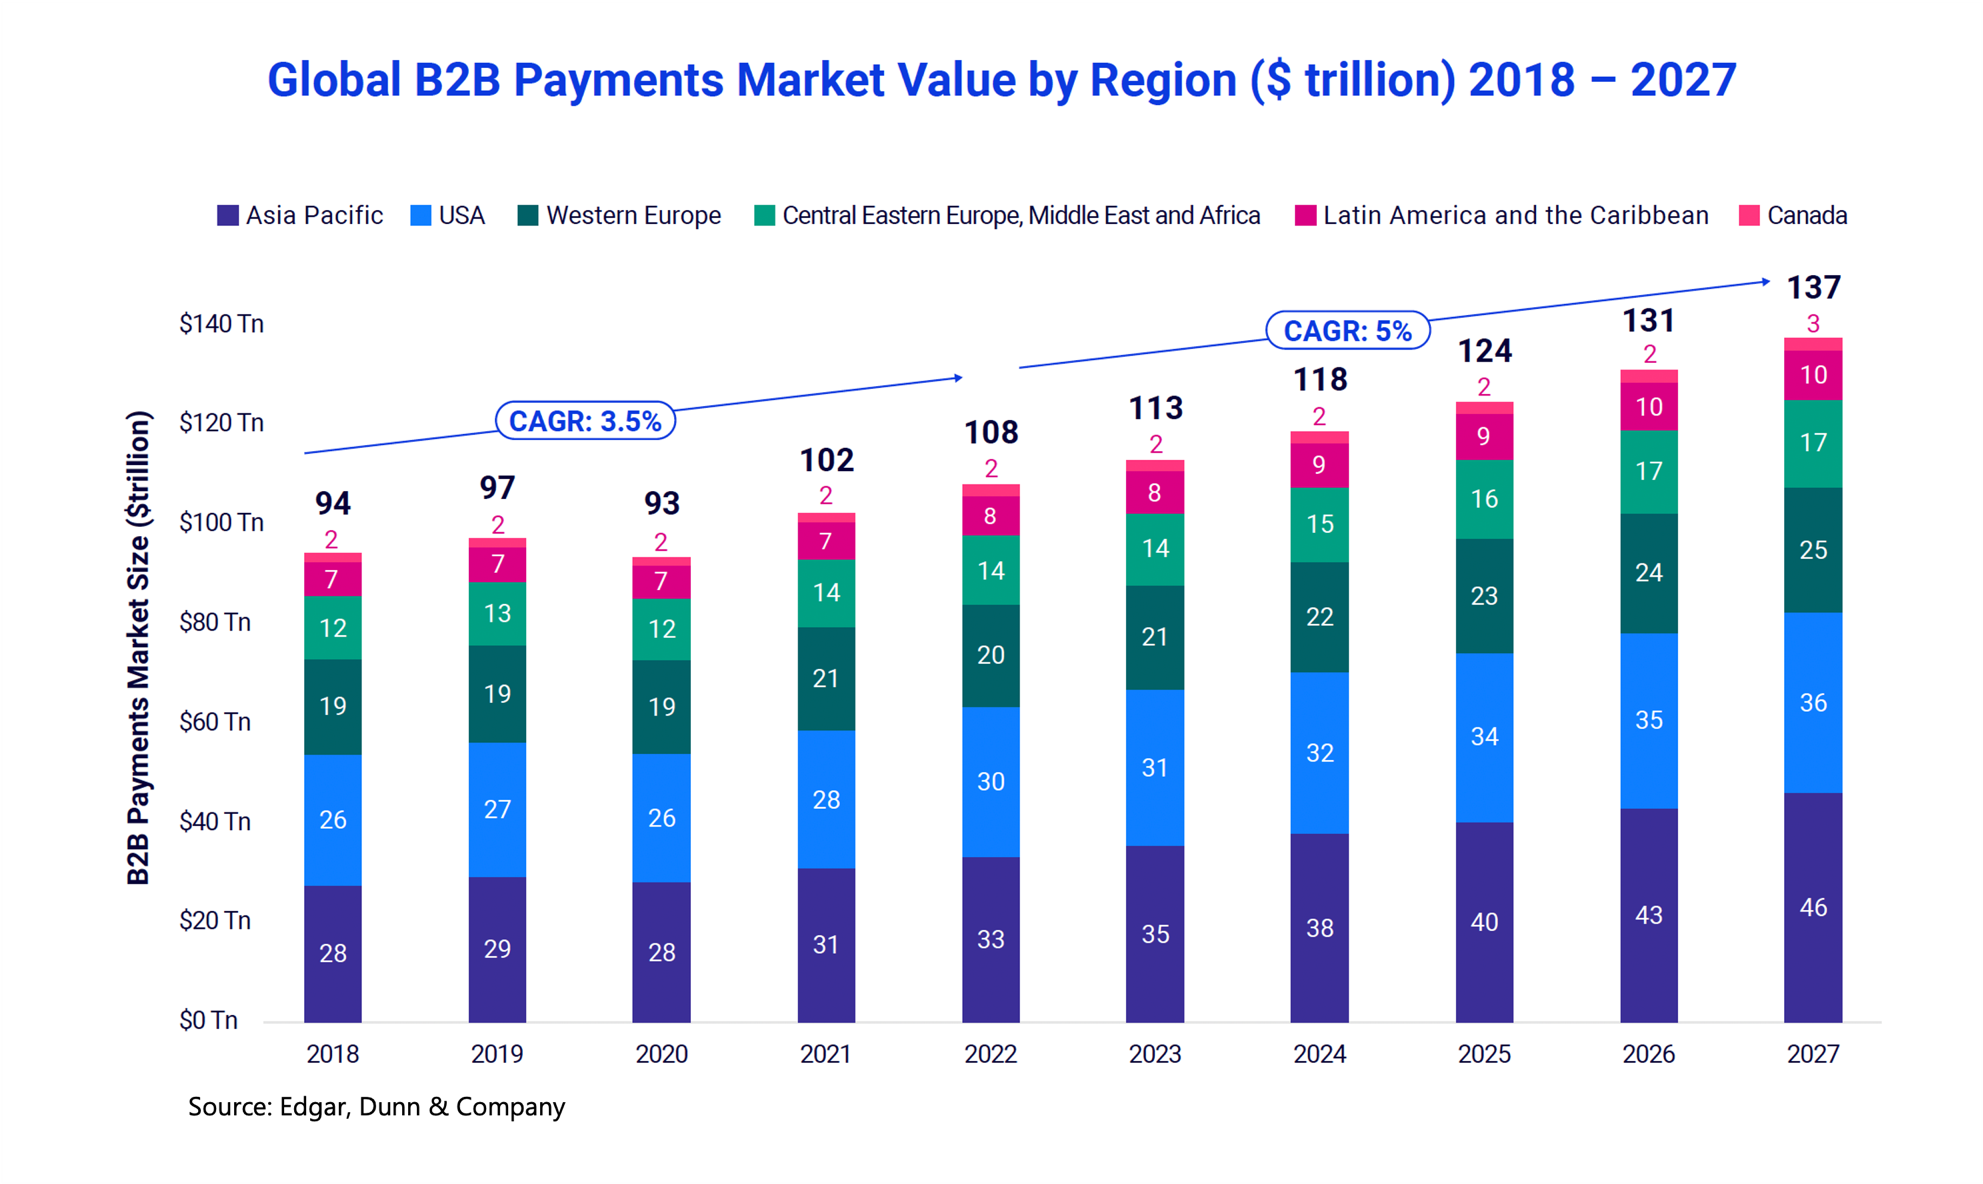 Global B2B Payments Market Value by Region